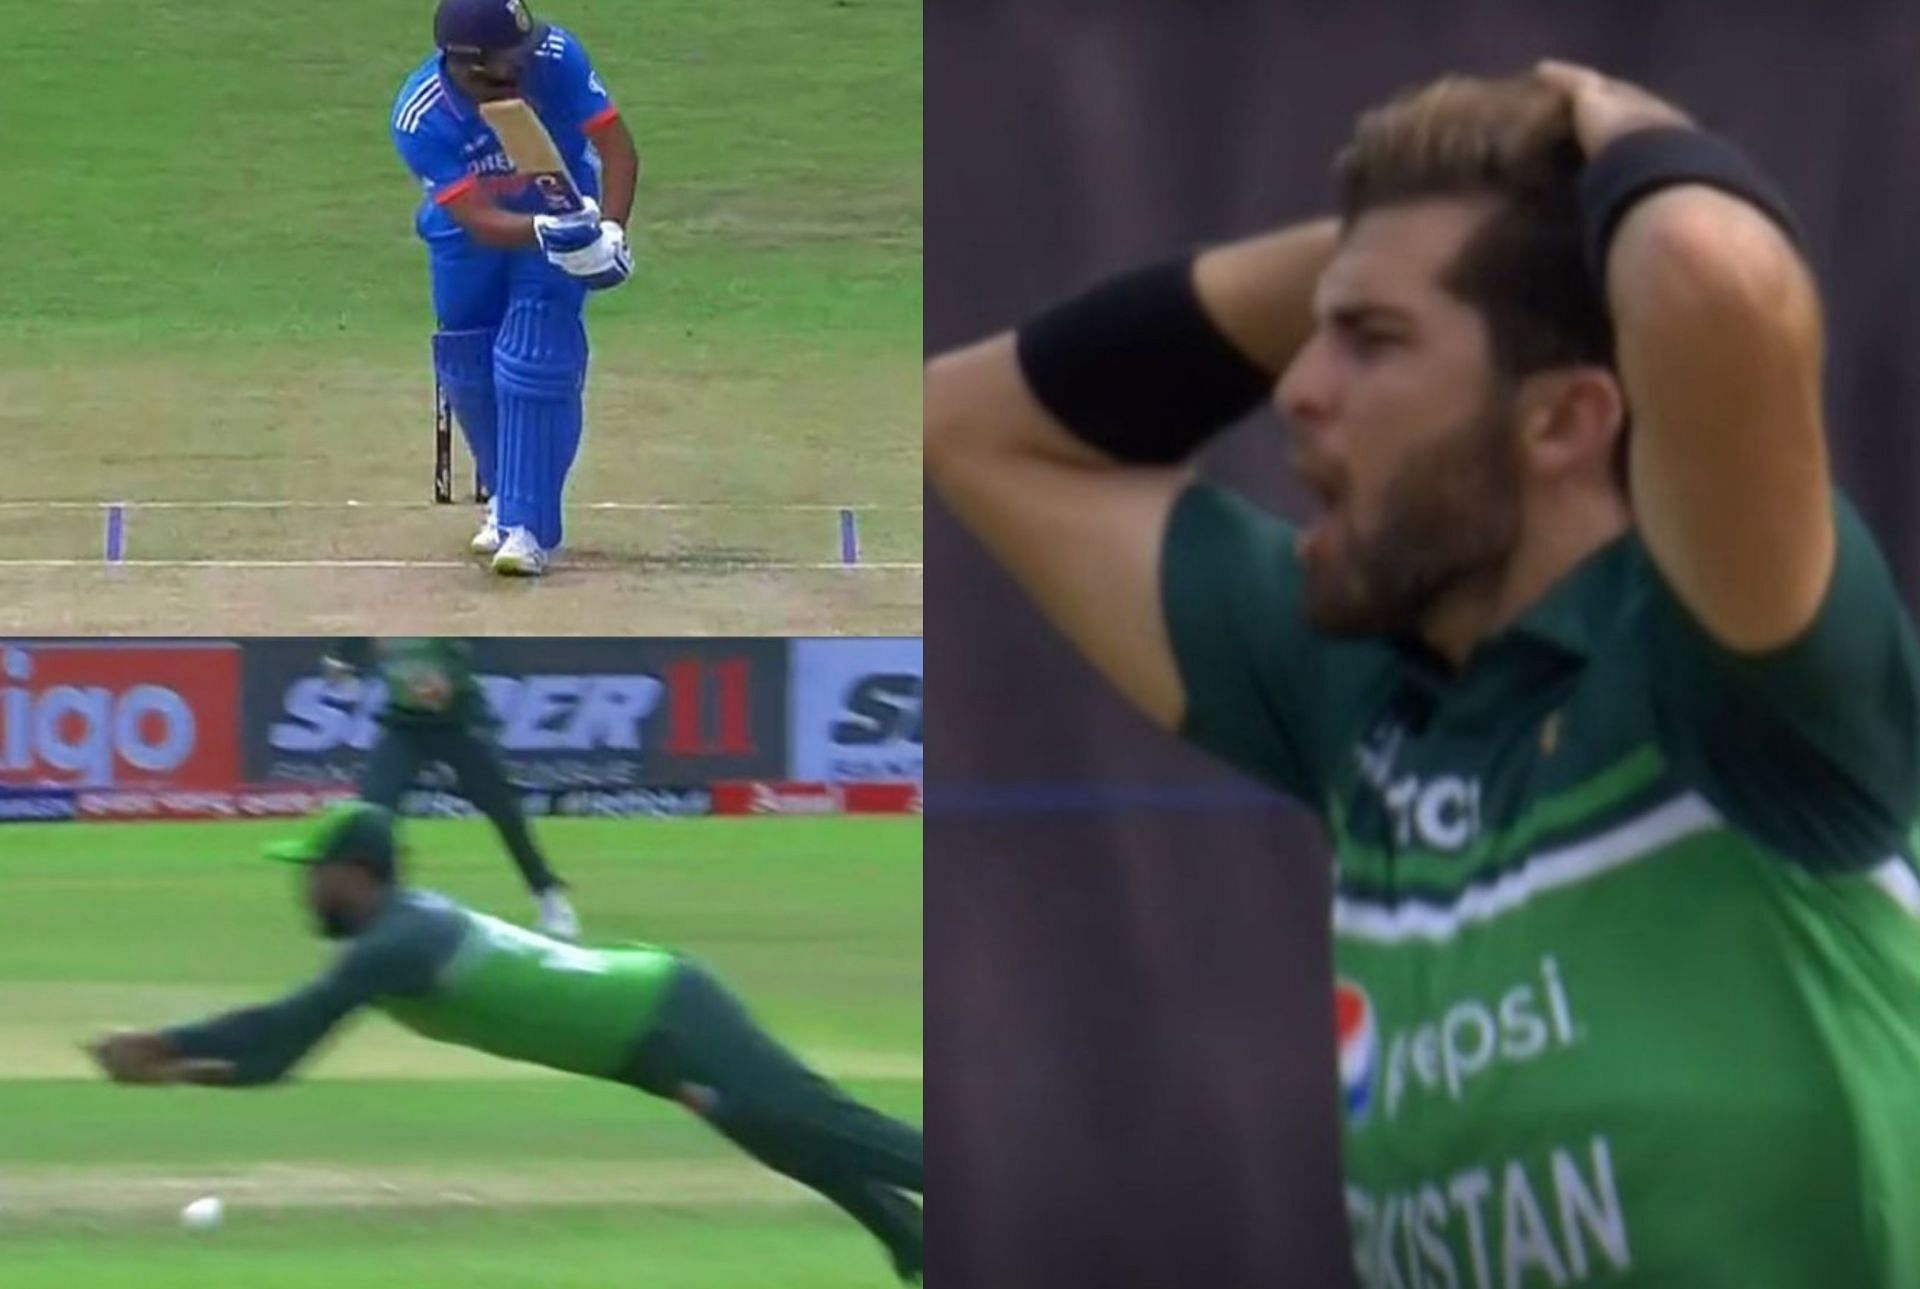 Shaheen Afridi disappointed after Zaman failed to hold on to the catch. 